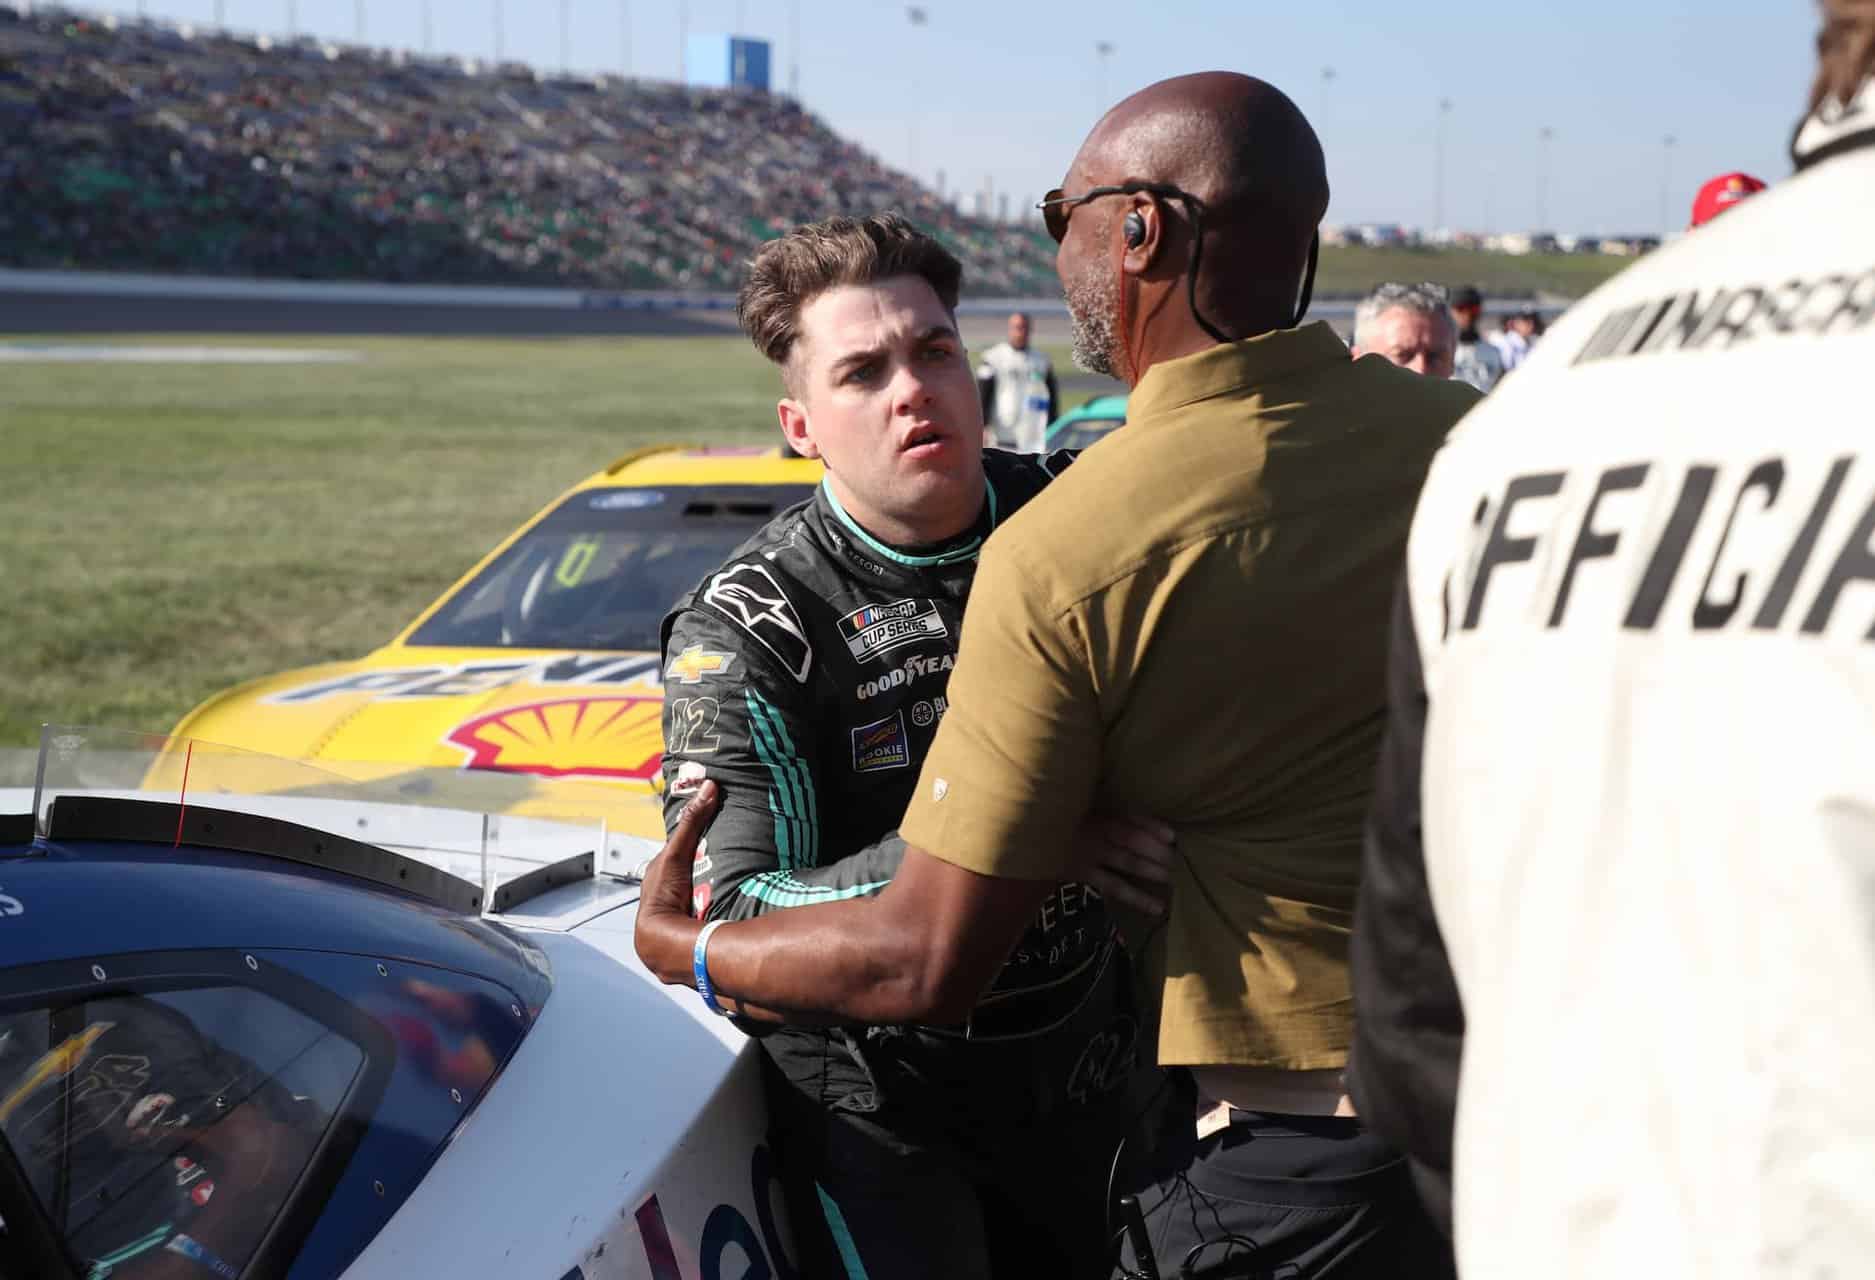 Noah gragson gets pulled away by security guards after confronting ross chastain.